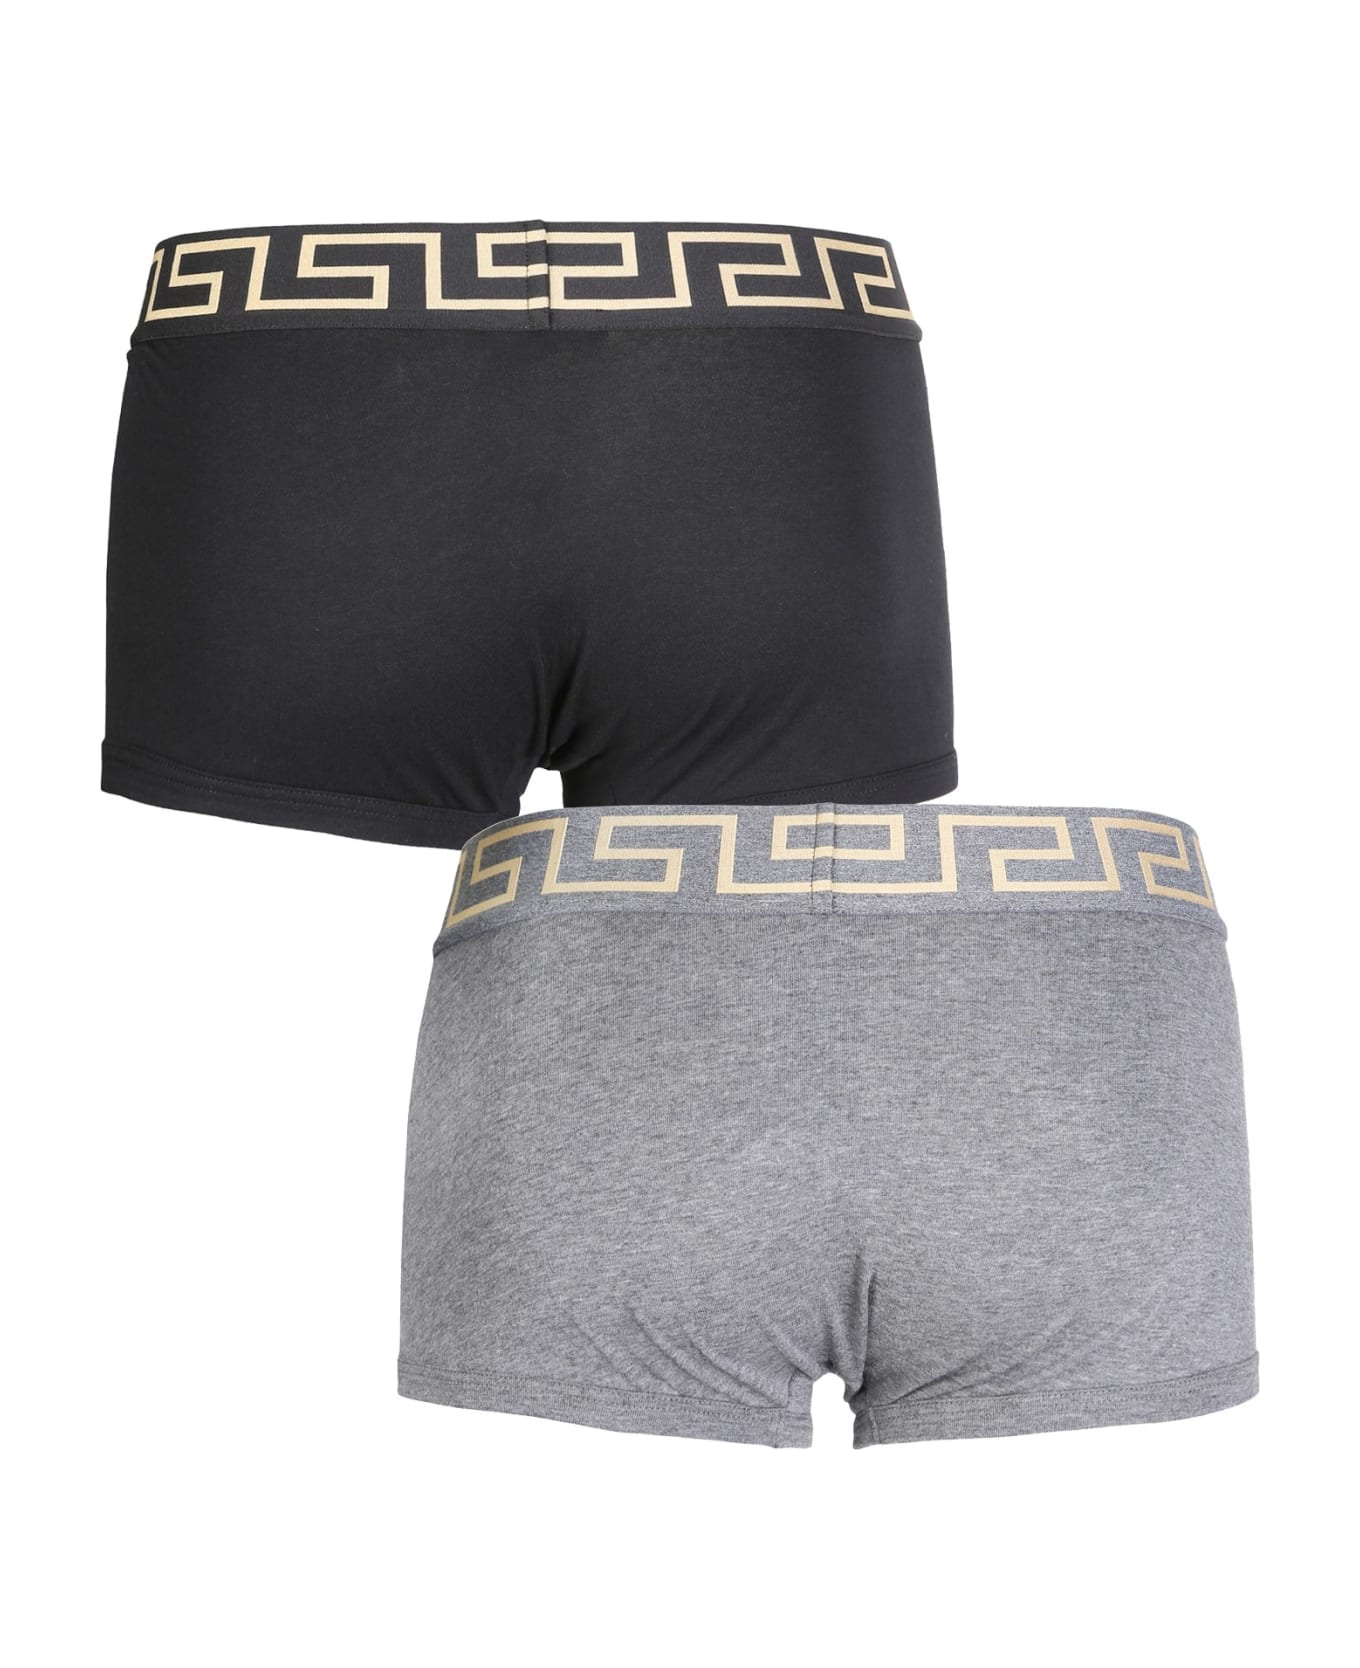 Versace Pack Of Two Boxer Shorts With Greek - NERO GRIGIO ショーツ